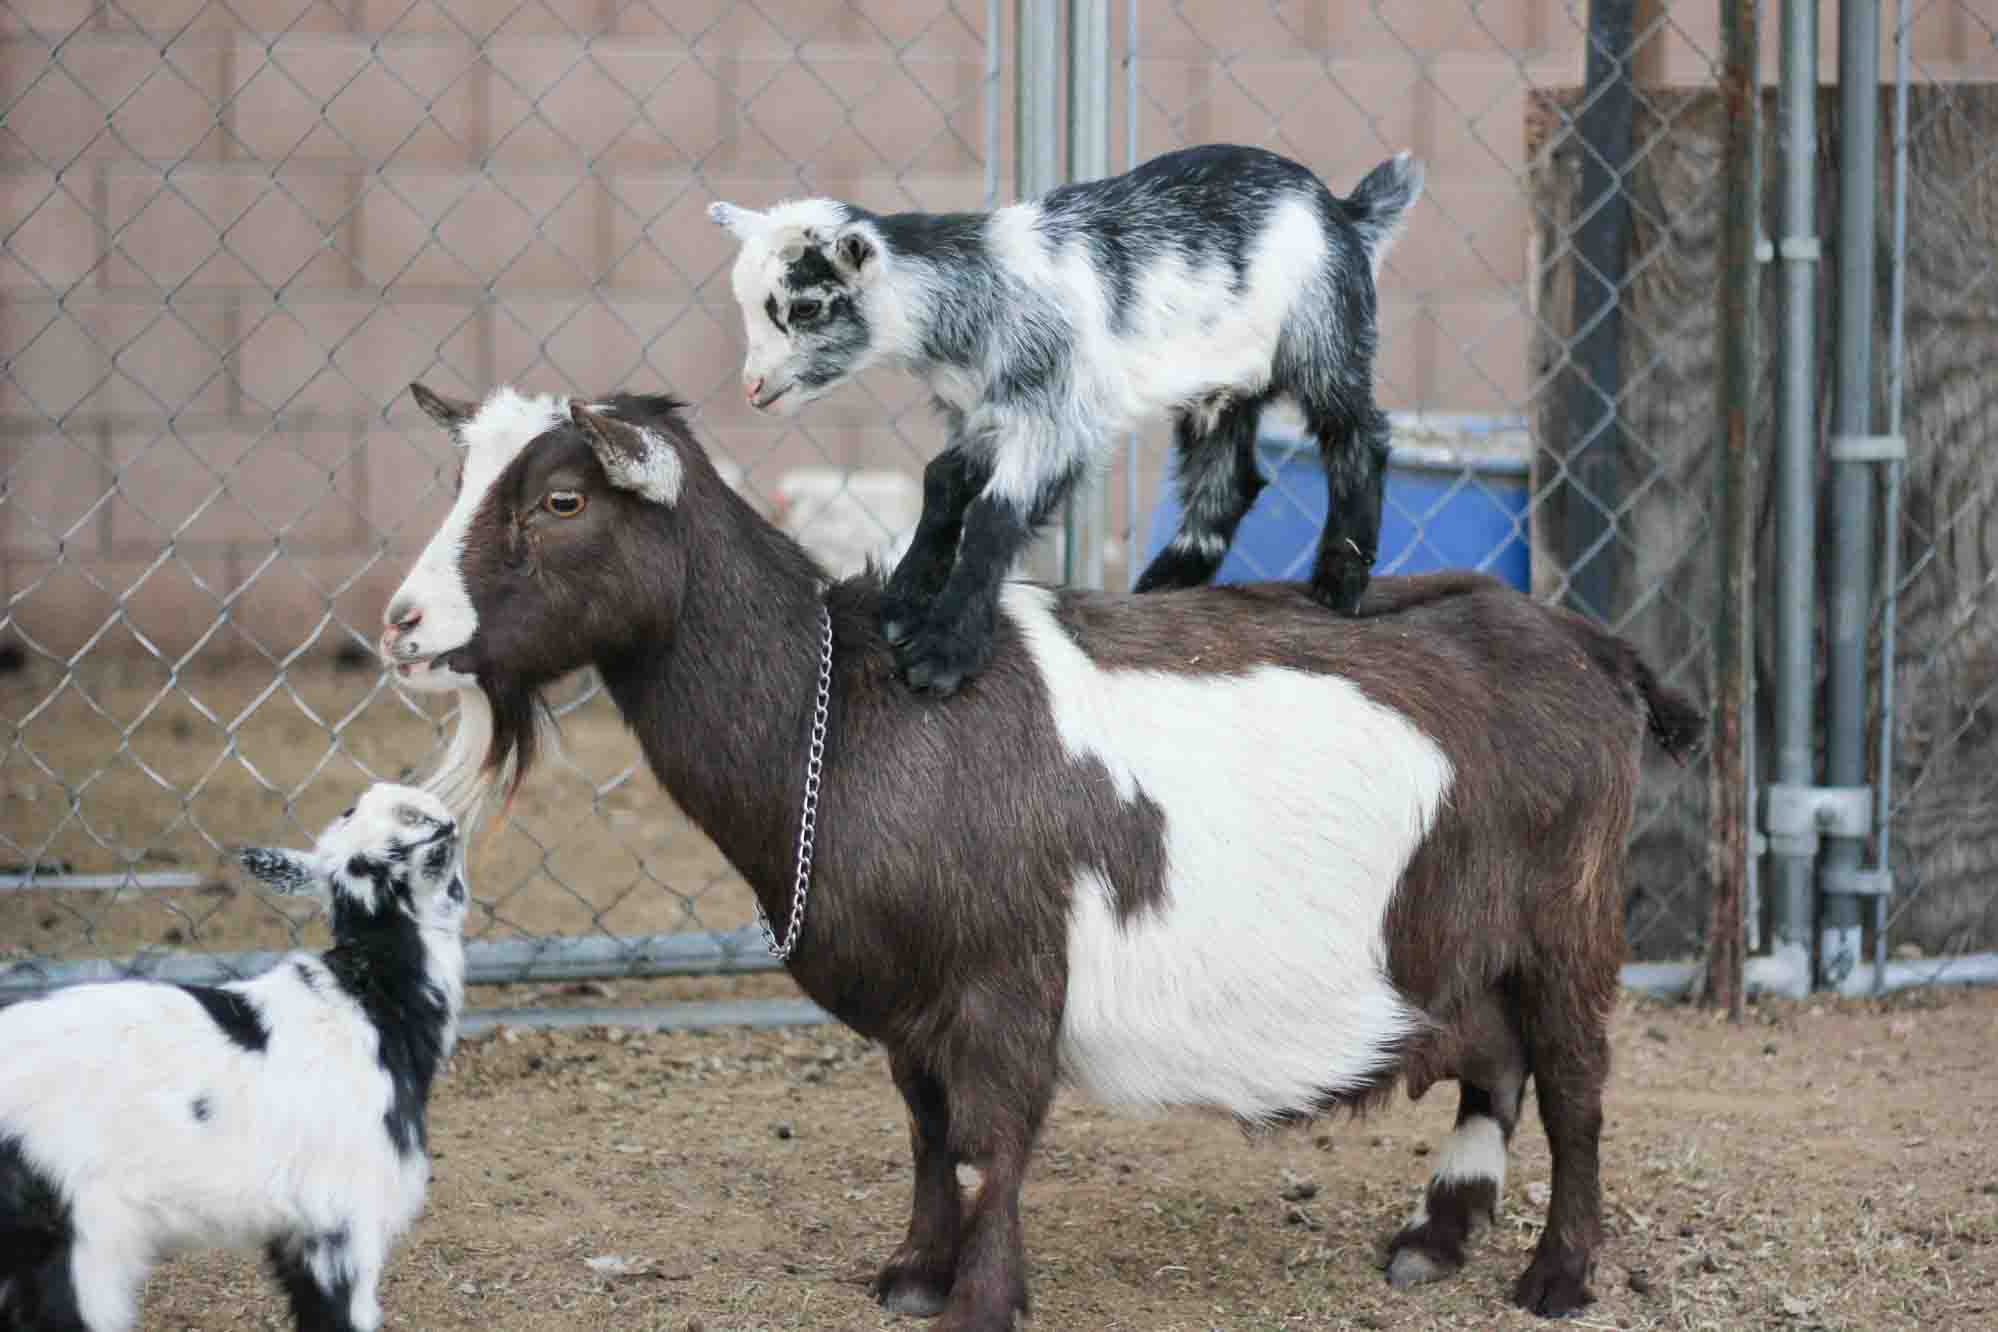 brown and white goat with two black and white baby goats, one on the goat's back